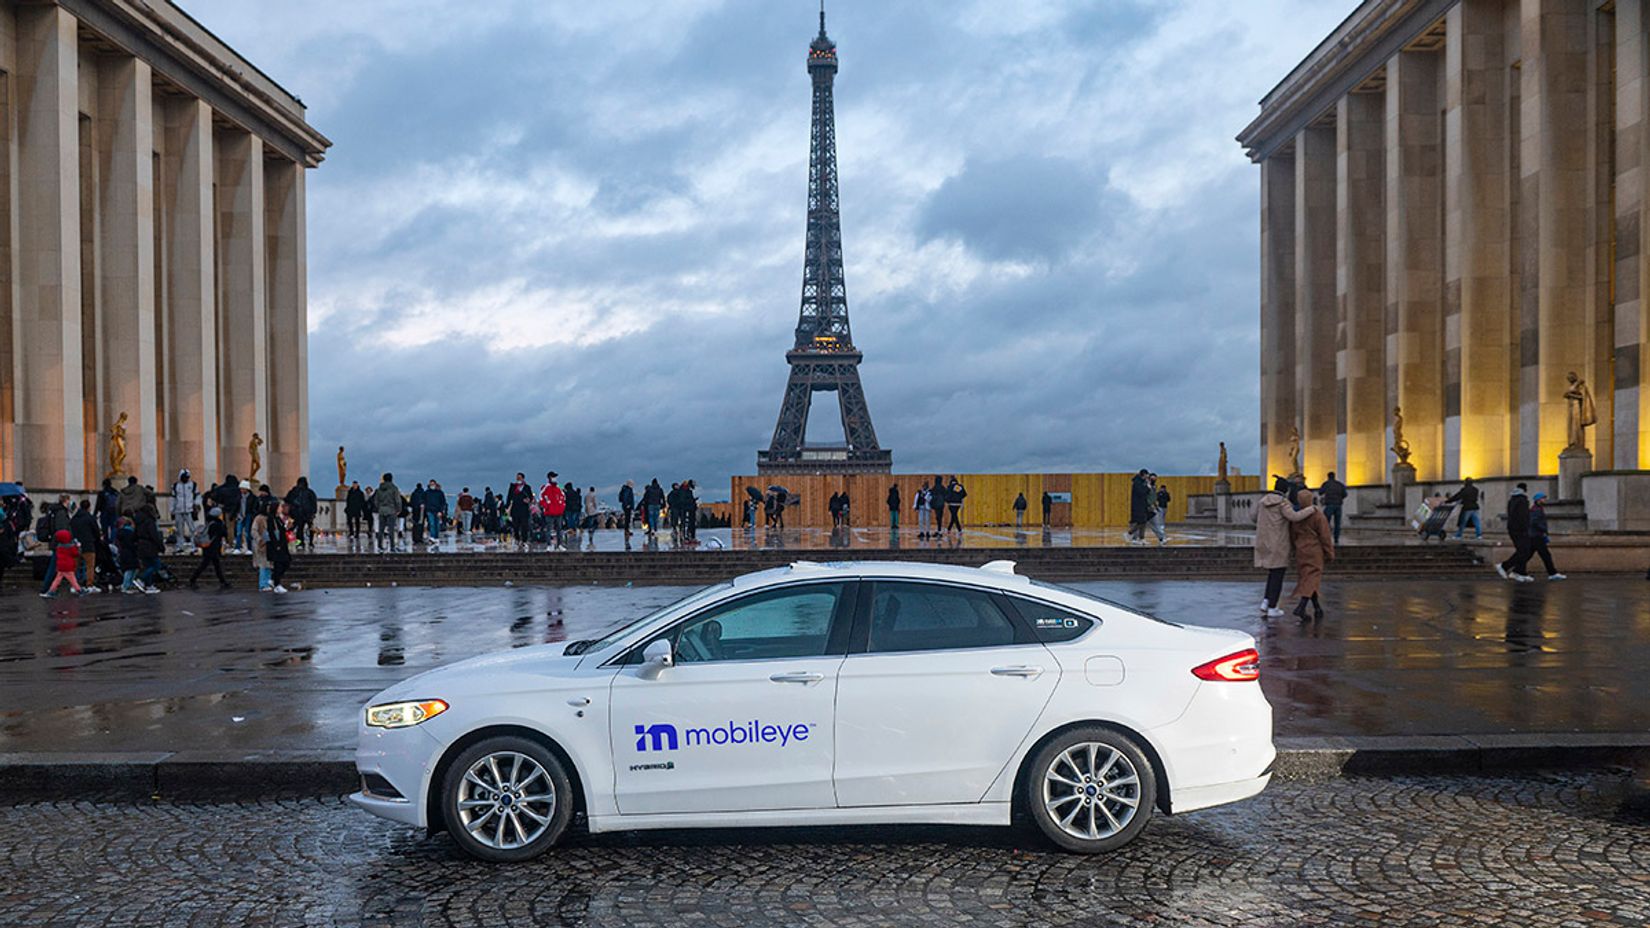 A Mobileye autonomous development vehicle opposite the Eifel Tower, pictured while undergoing testing in Paris.